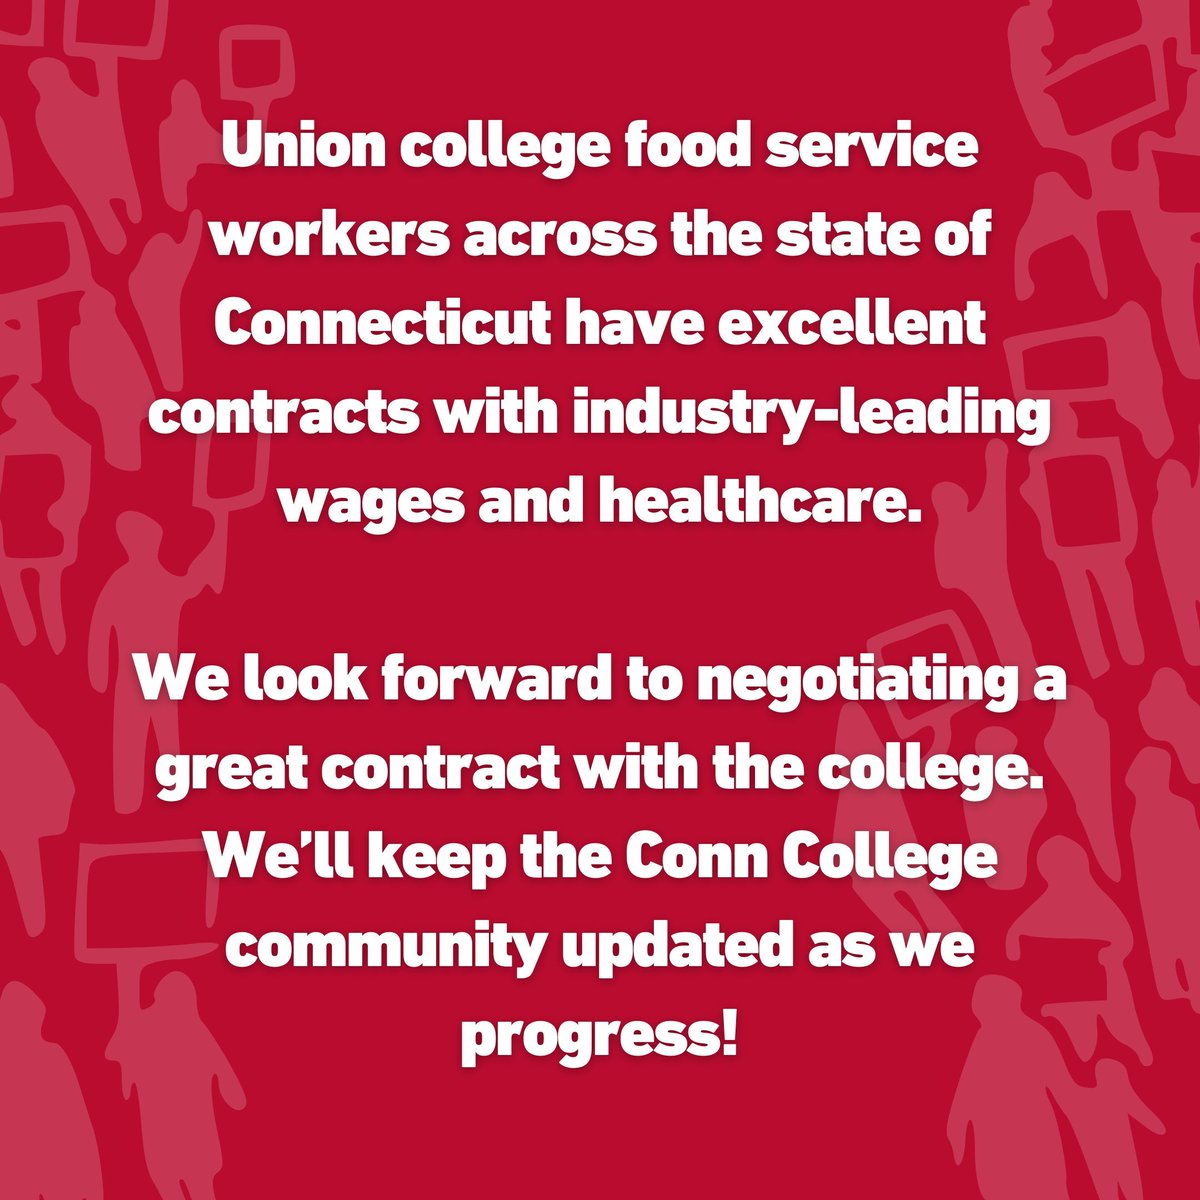 CONNECTICUT COLLEGE DINING WORKERS HAVE WON OUR UNION WITH A MARGIN OF 92%!! Thank you to all our supporters, especially the Conn College community. We look forward to negotiating a great first contract!